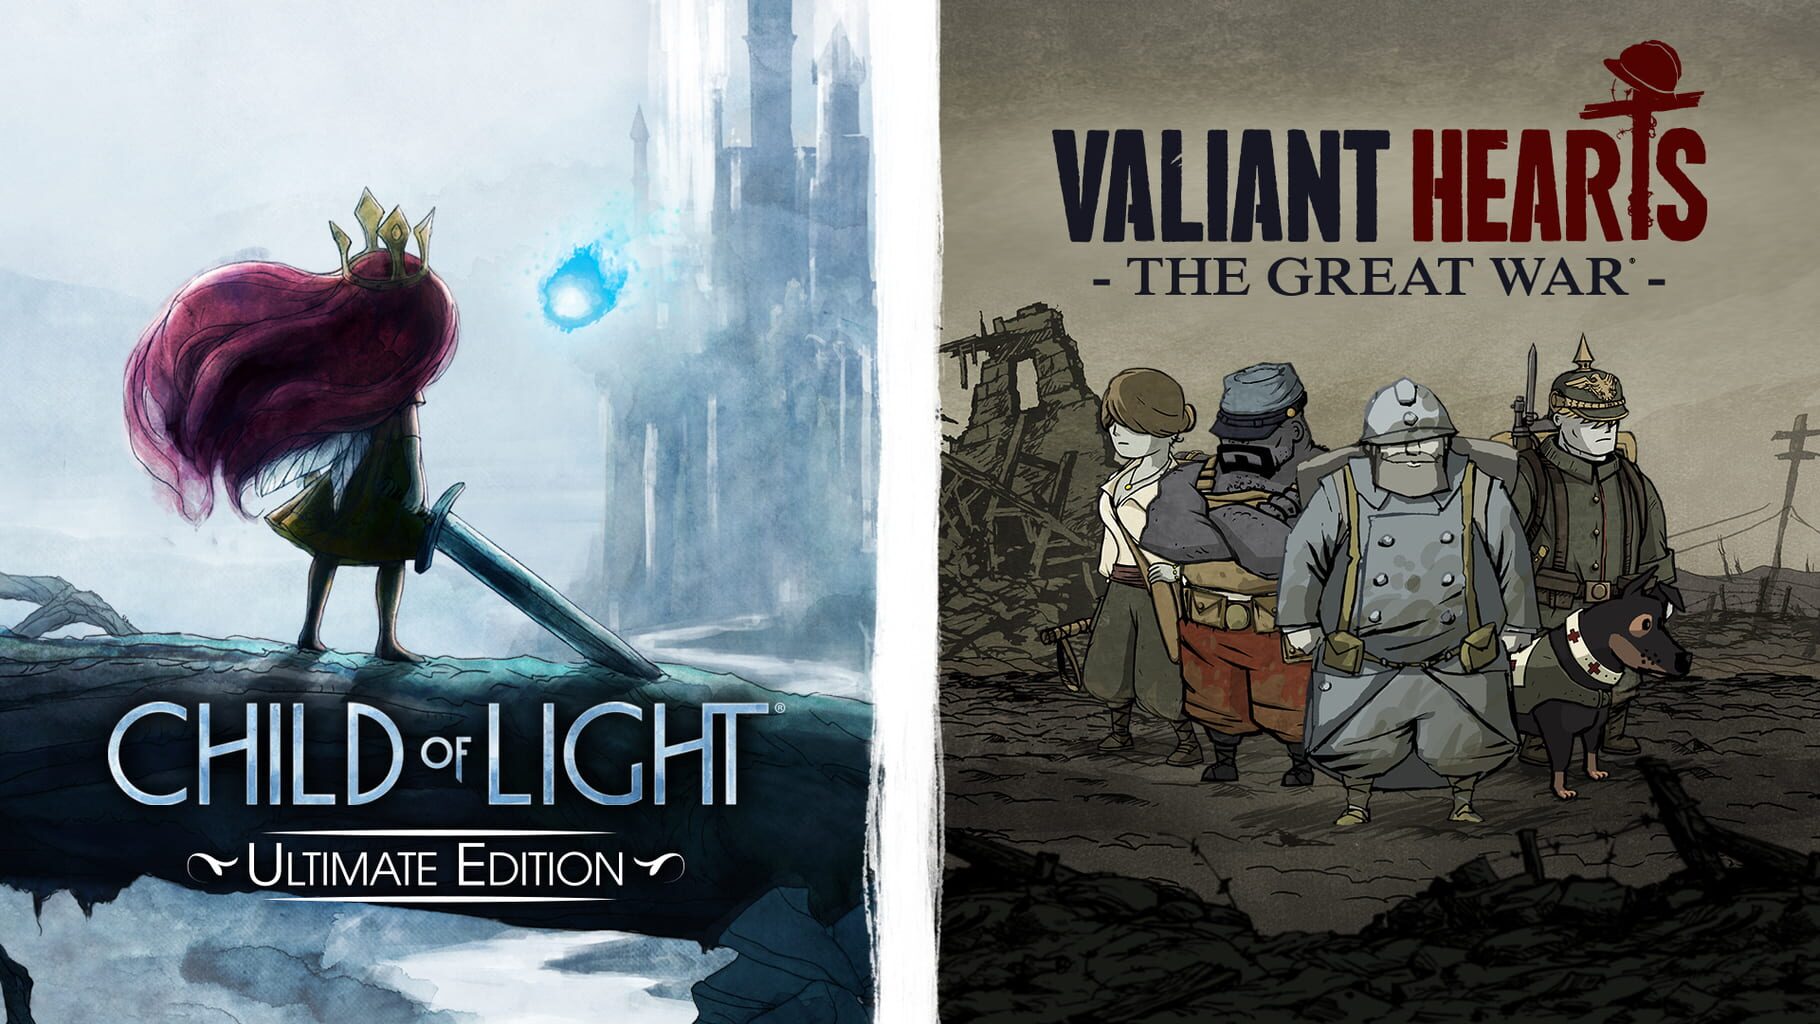 Child of Light: Ultimate Edition + Valiant Hearts: The Great War artwork